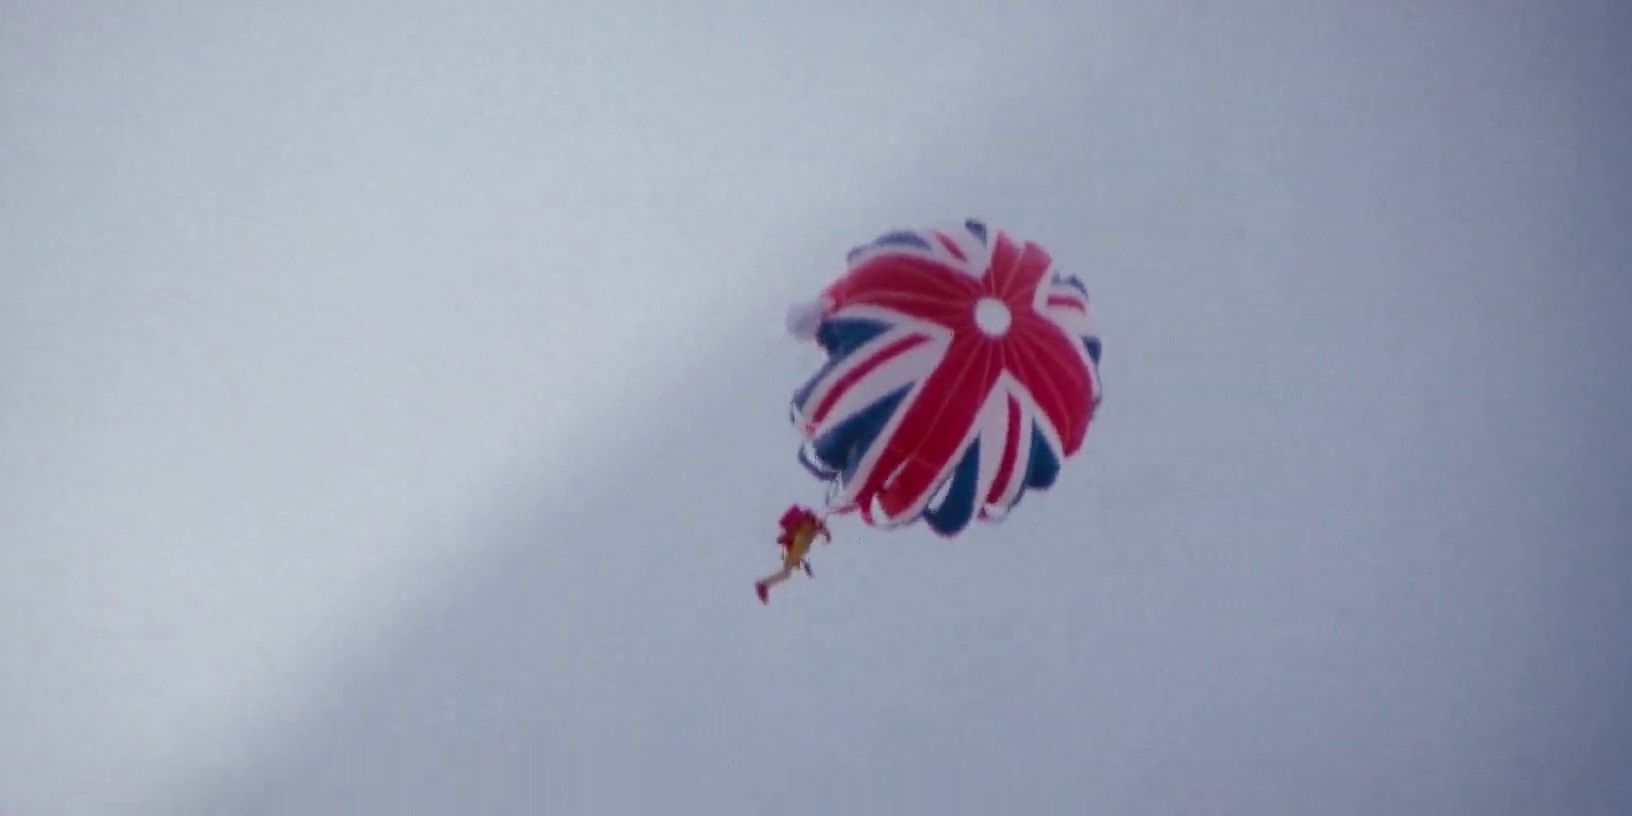 James Bond's opening parachute jump in The Spy Who Loved Me.